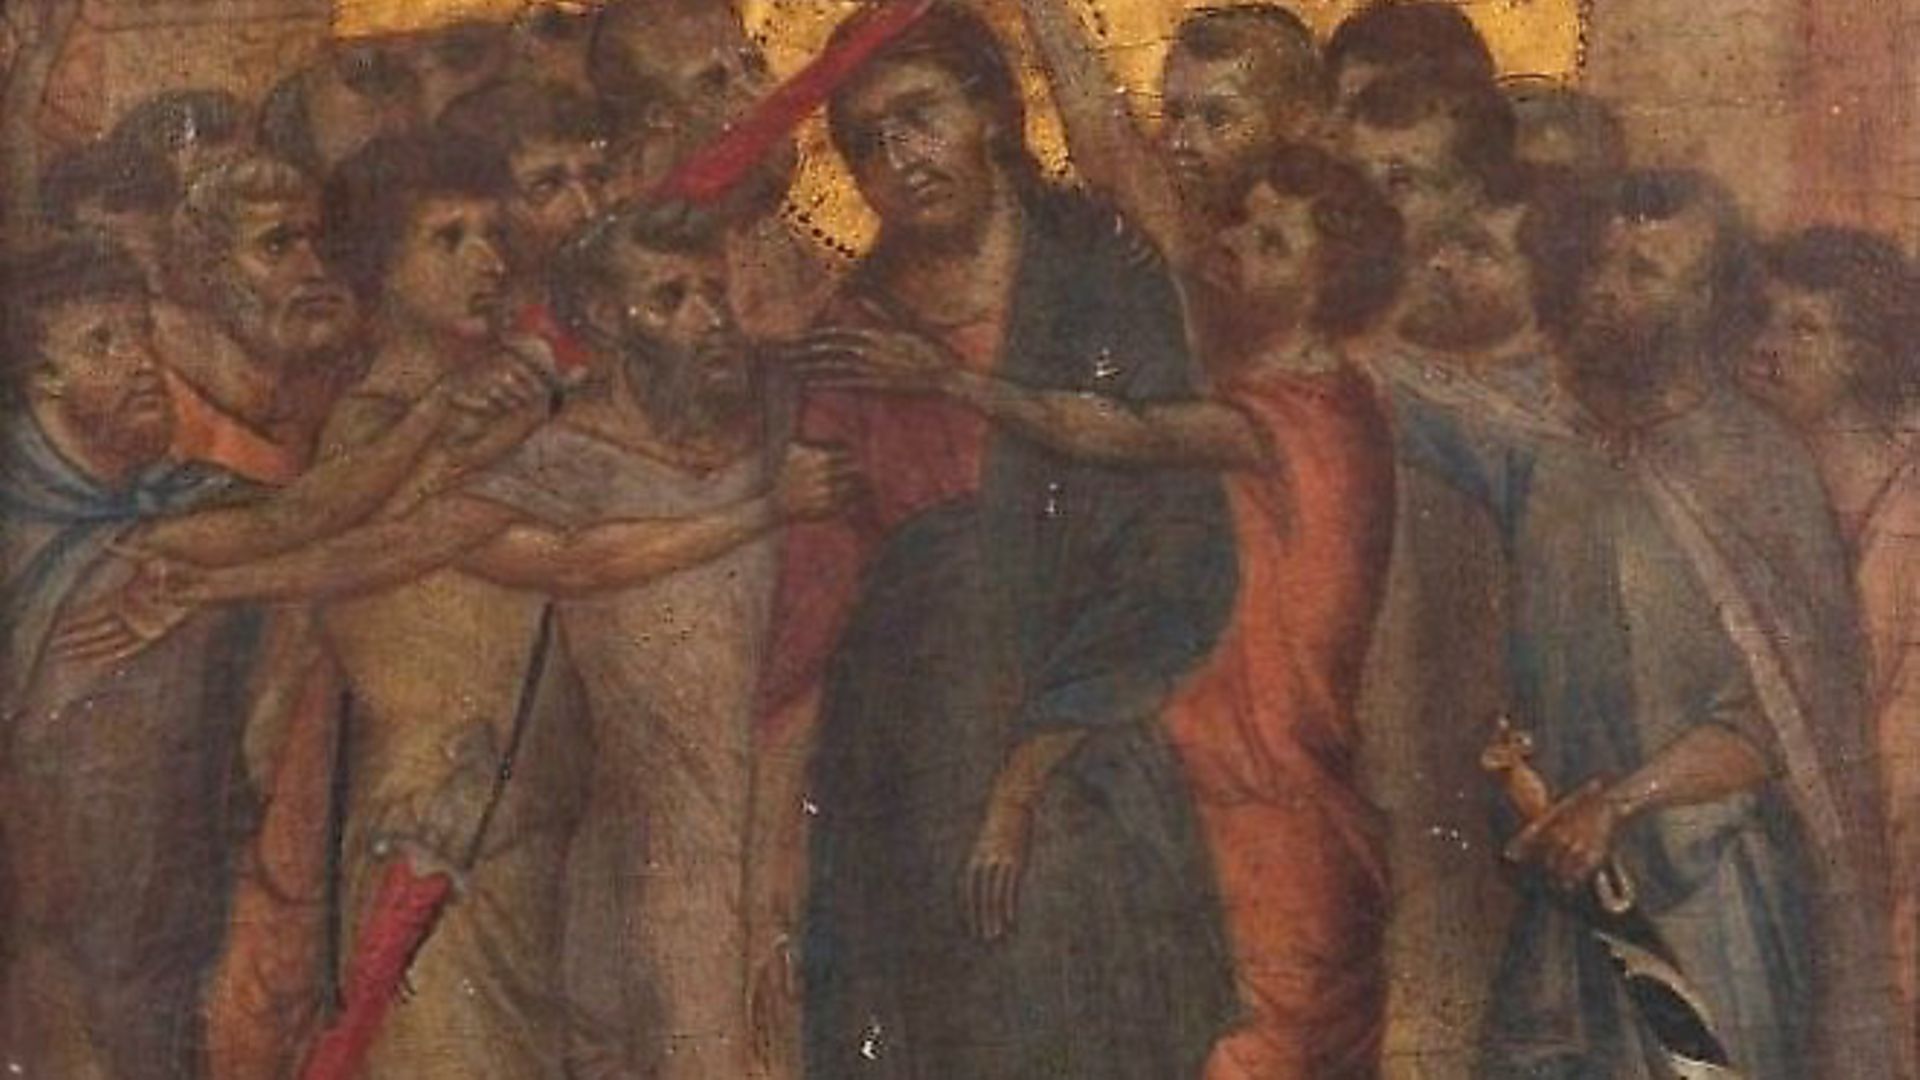 Christ Mocked by the Italian master Cimabue (question two) - Credit: Cimabue